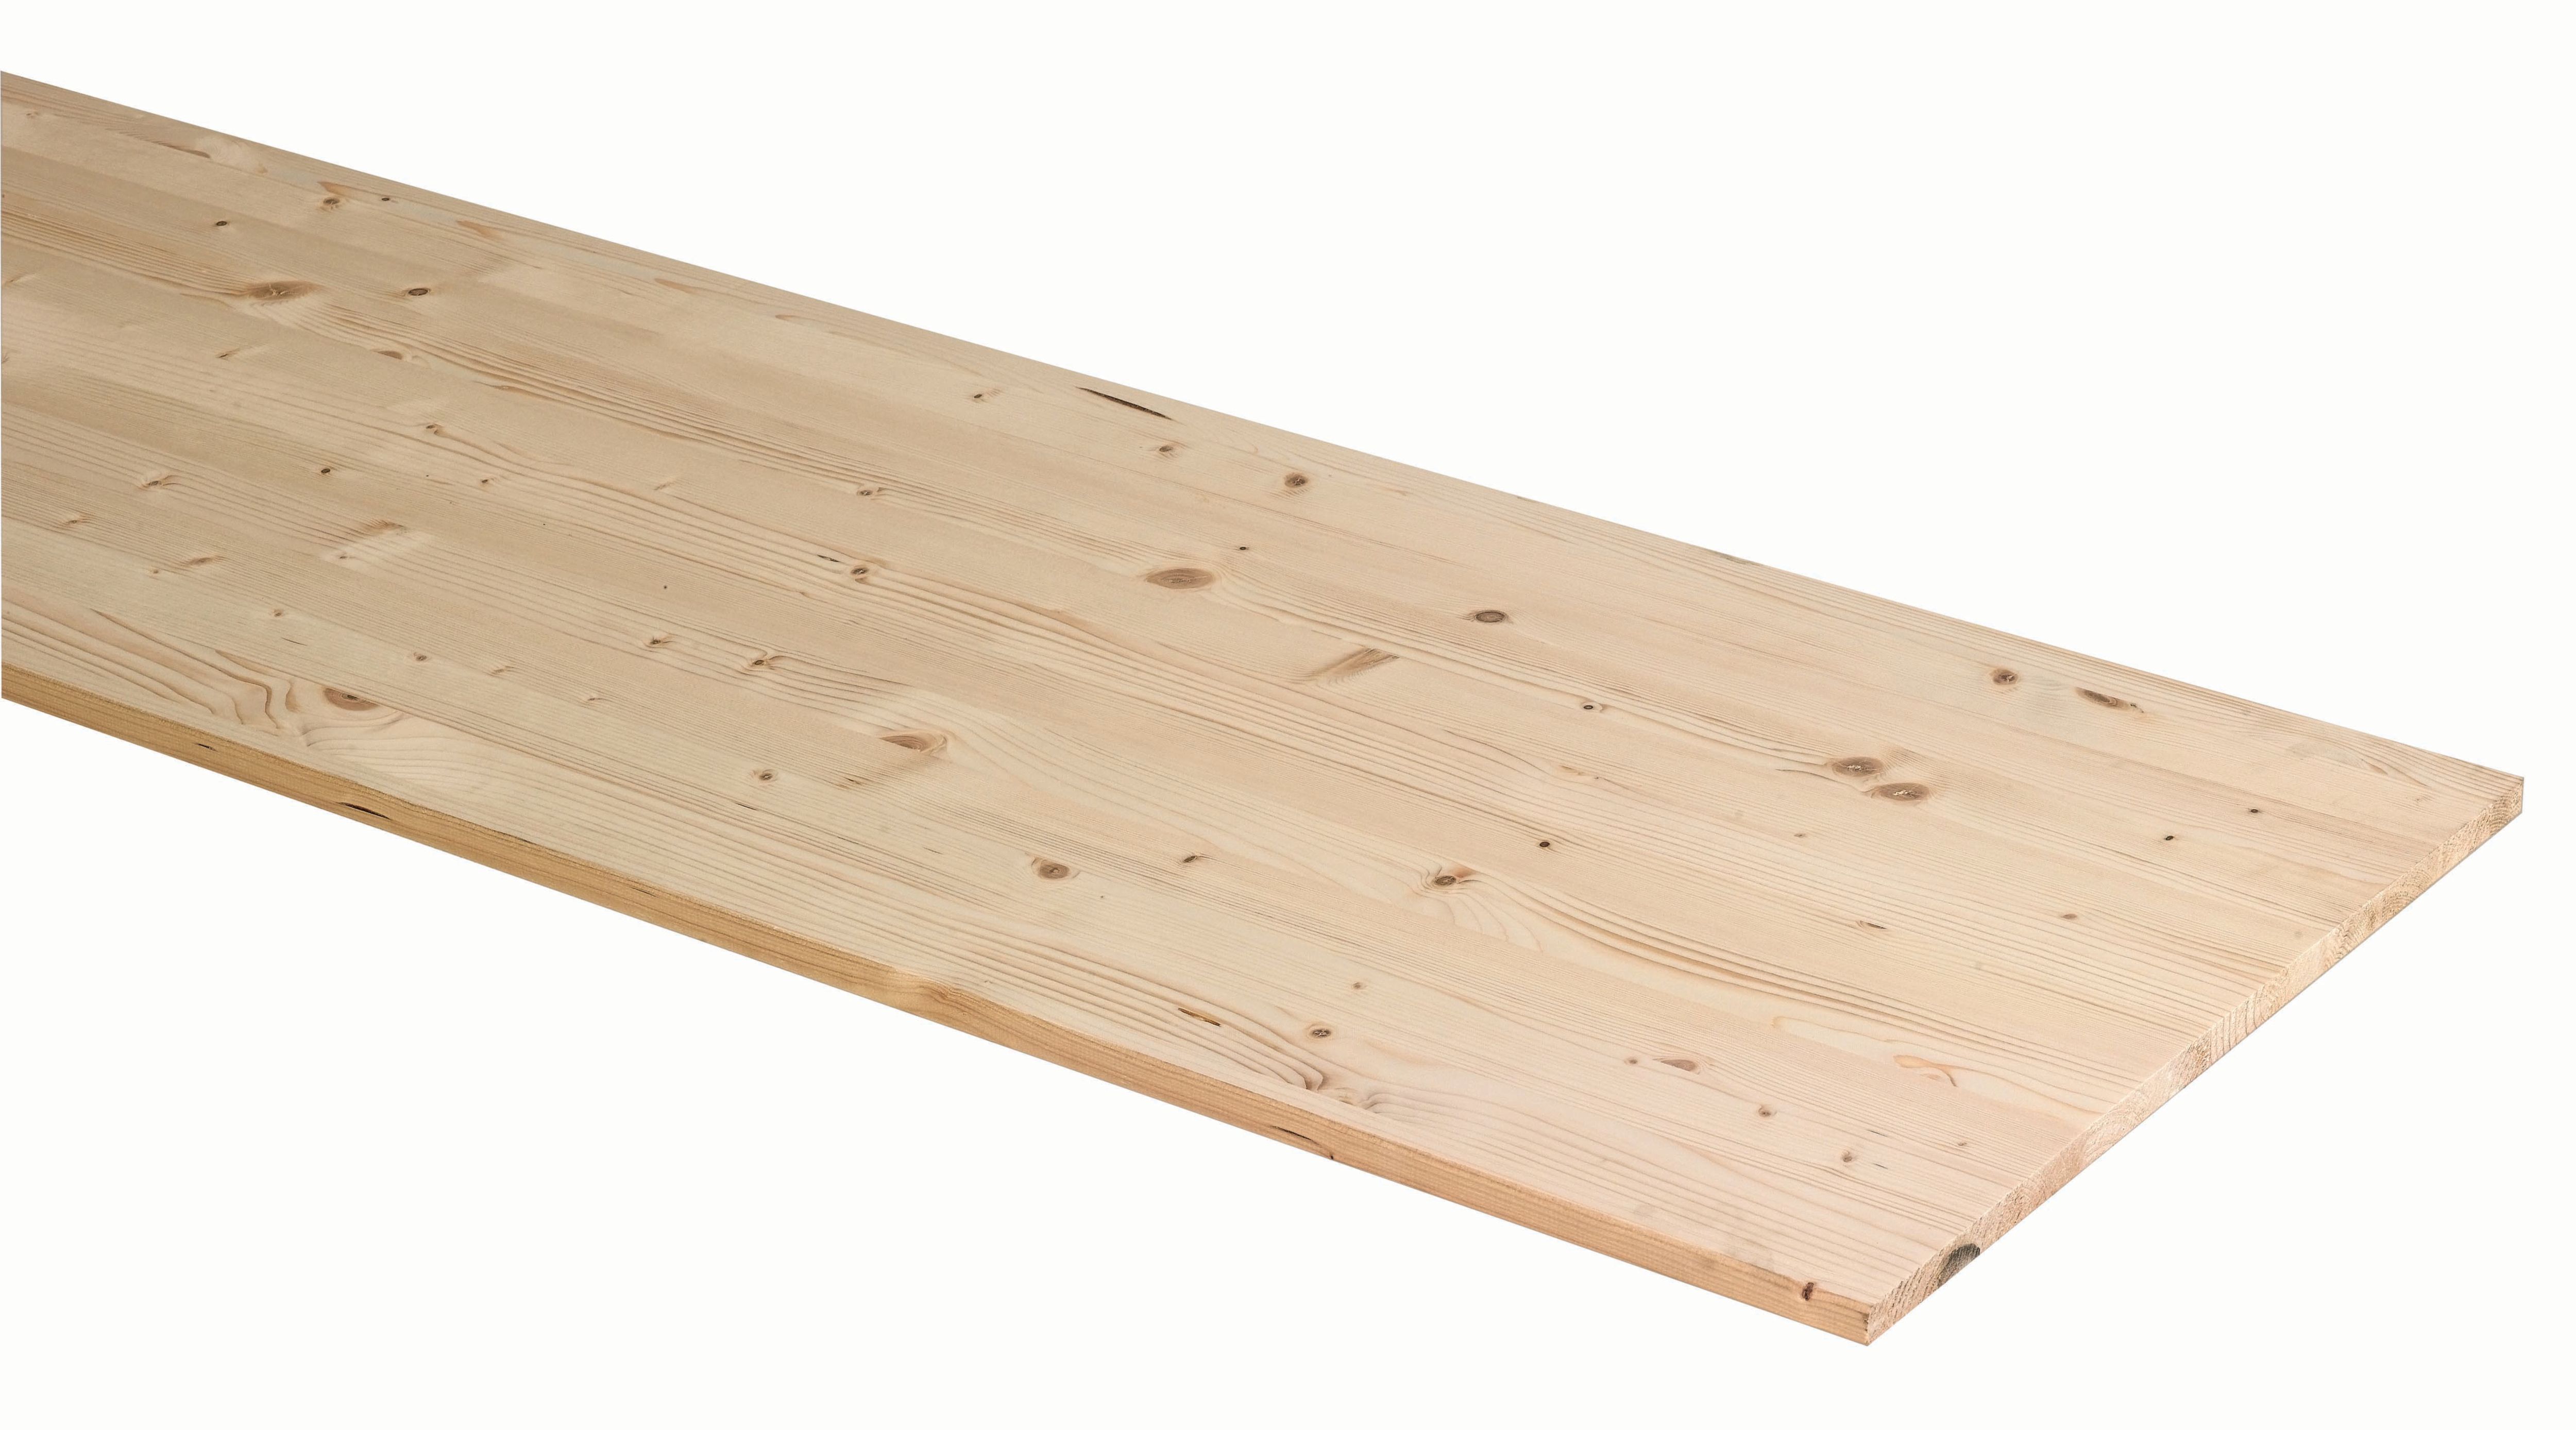 Image of Wickes General Purpose Spruce Timberboard - 18mm x 300mm x 2350mm